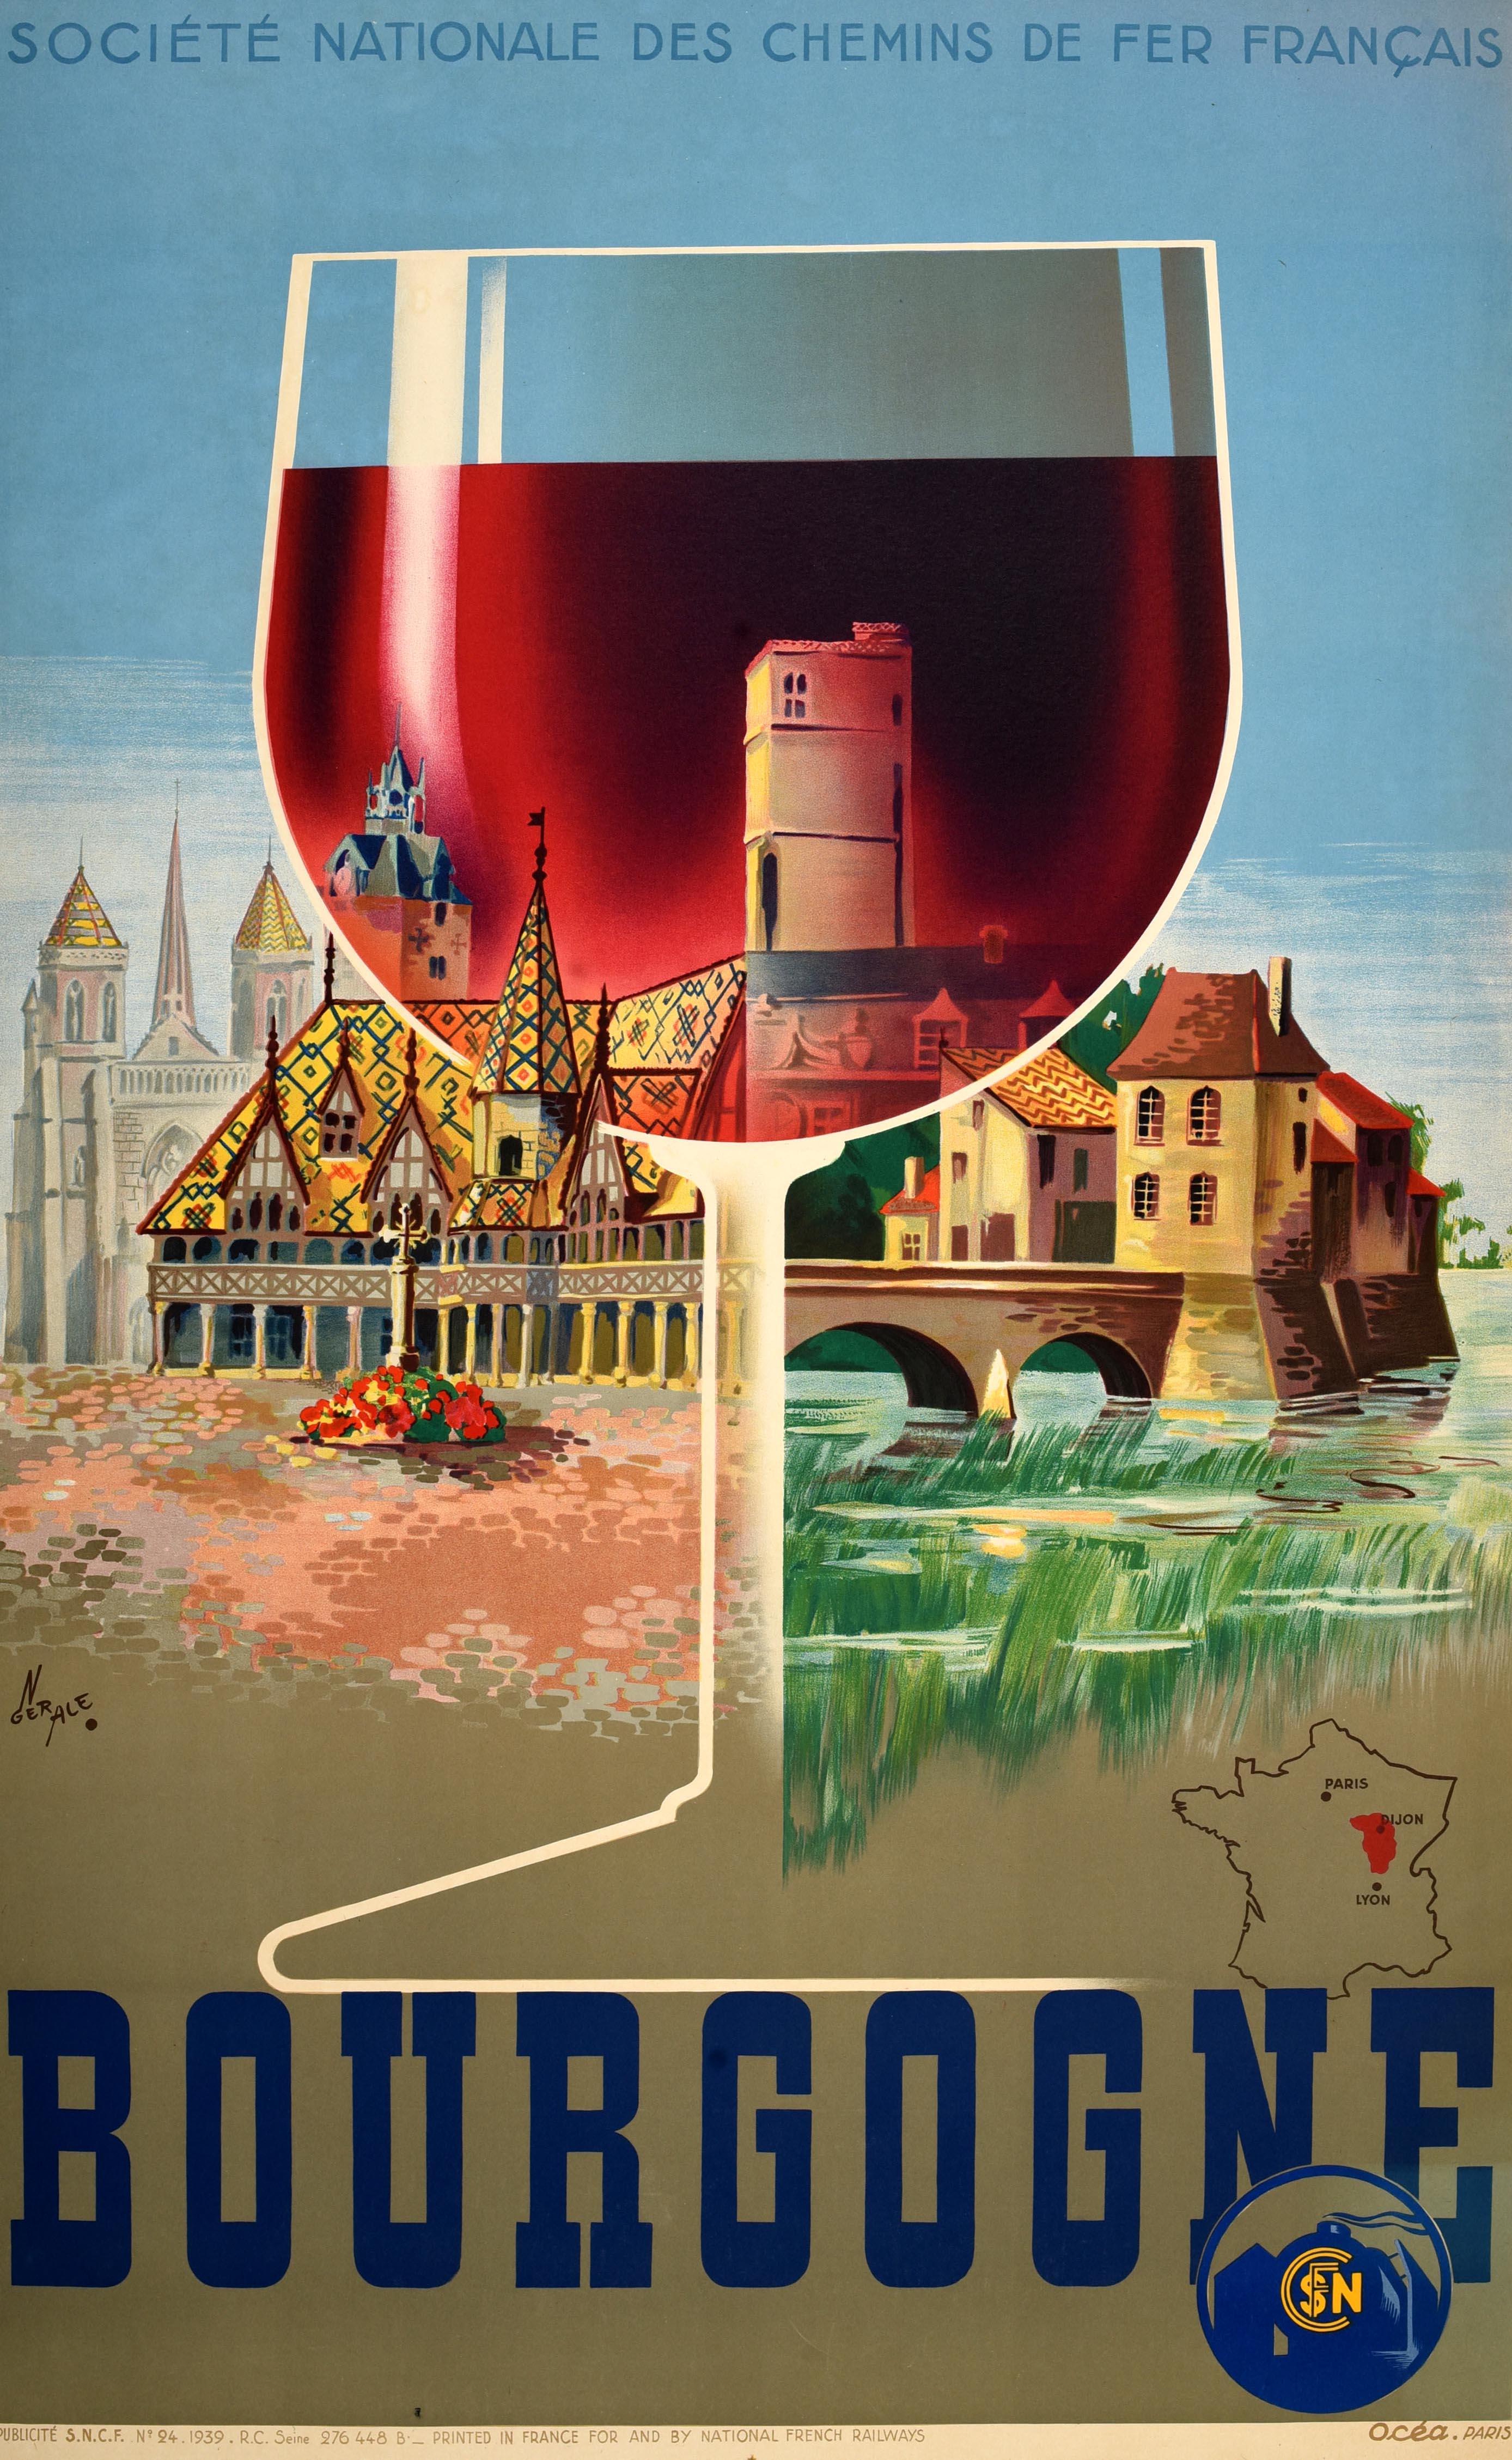 Original vintage train travel poster for Bourgogne / Burgundy issued by the National Society of French Railways SNCF Societe Nationale Des Chemins De Fer Francais featuring artwork by Gerard Alexandre (1914-1974) depicting a large glass of red wine